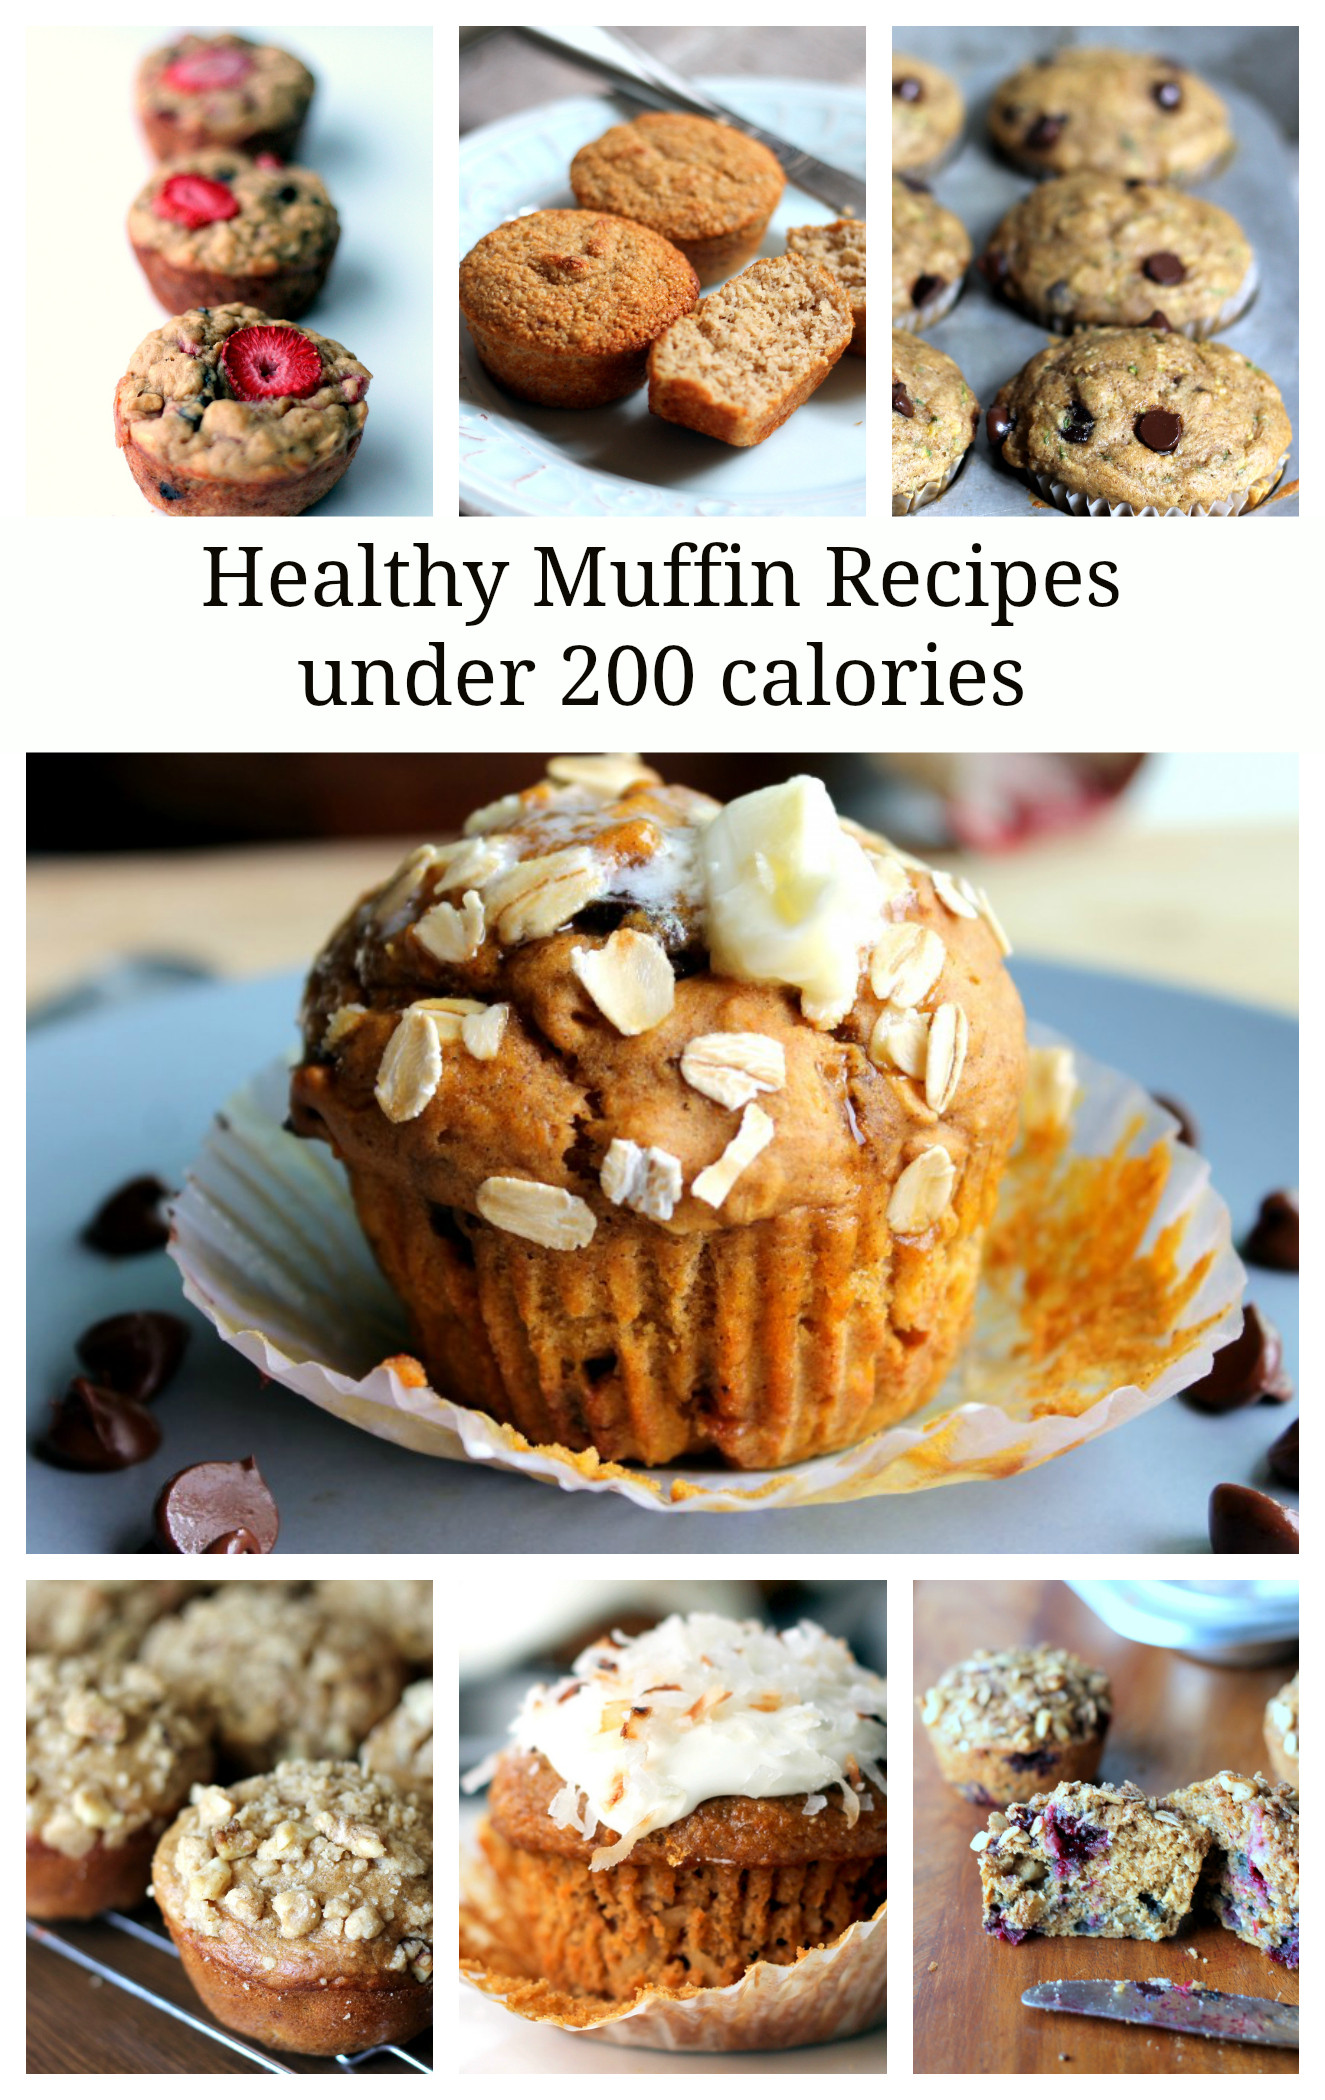 Healthy Breakfast Muffin Recipe
 7 Healthy Muffin Recipes Under 200 Calories